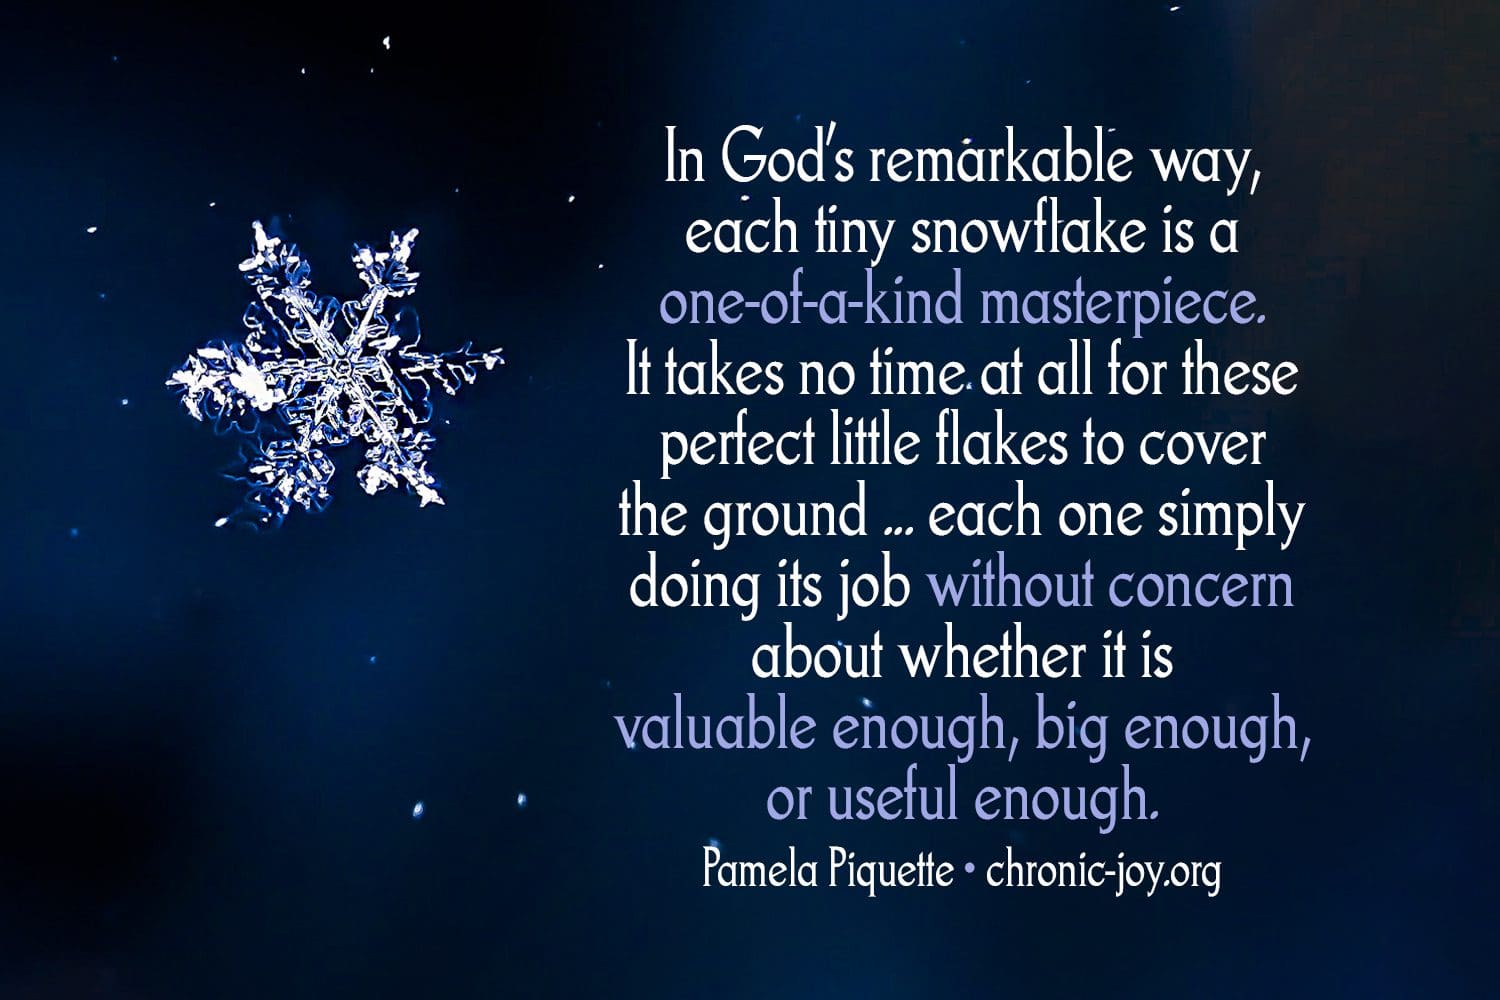 "In God’s remarkable way, each tiny flake is a one-of-a-kind masterpiece. It takes no time at all for these perfect little flakes to cover the ground ... each one simply doing its job without concern about whether it is valuable enough, big enough, or useful enough." Pamela Piquette